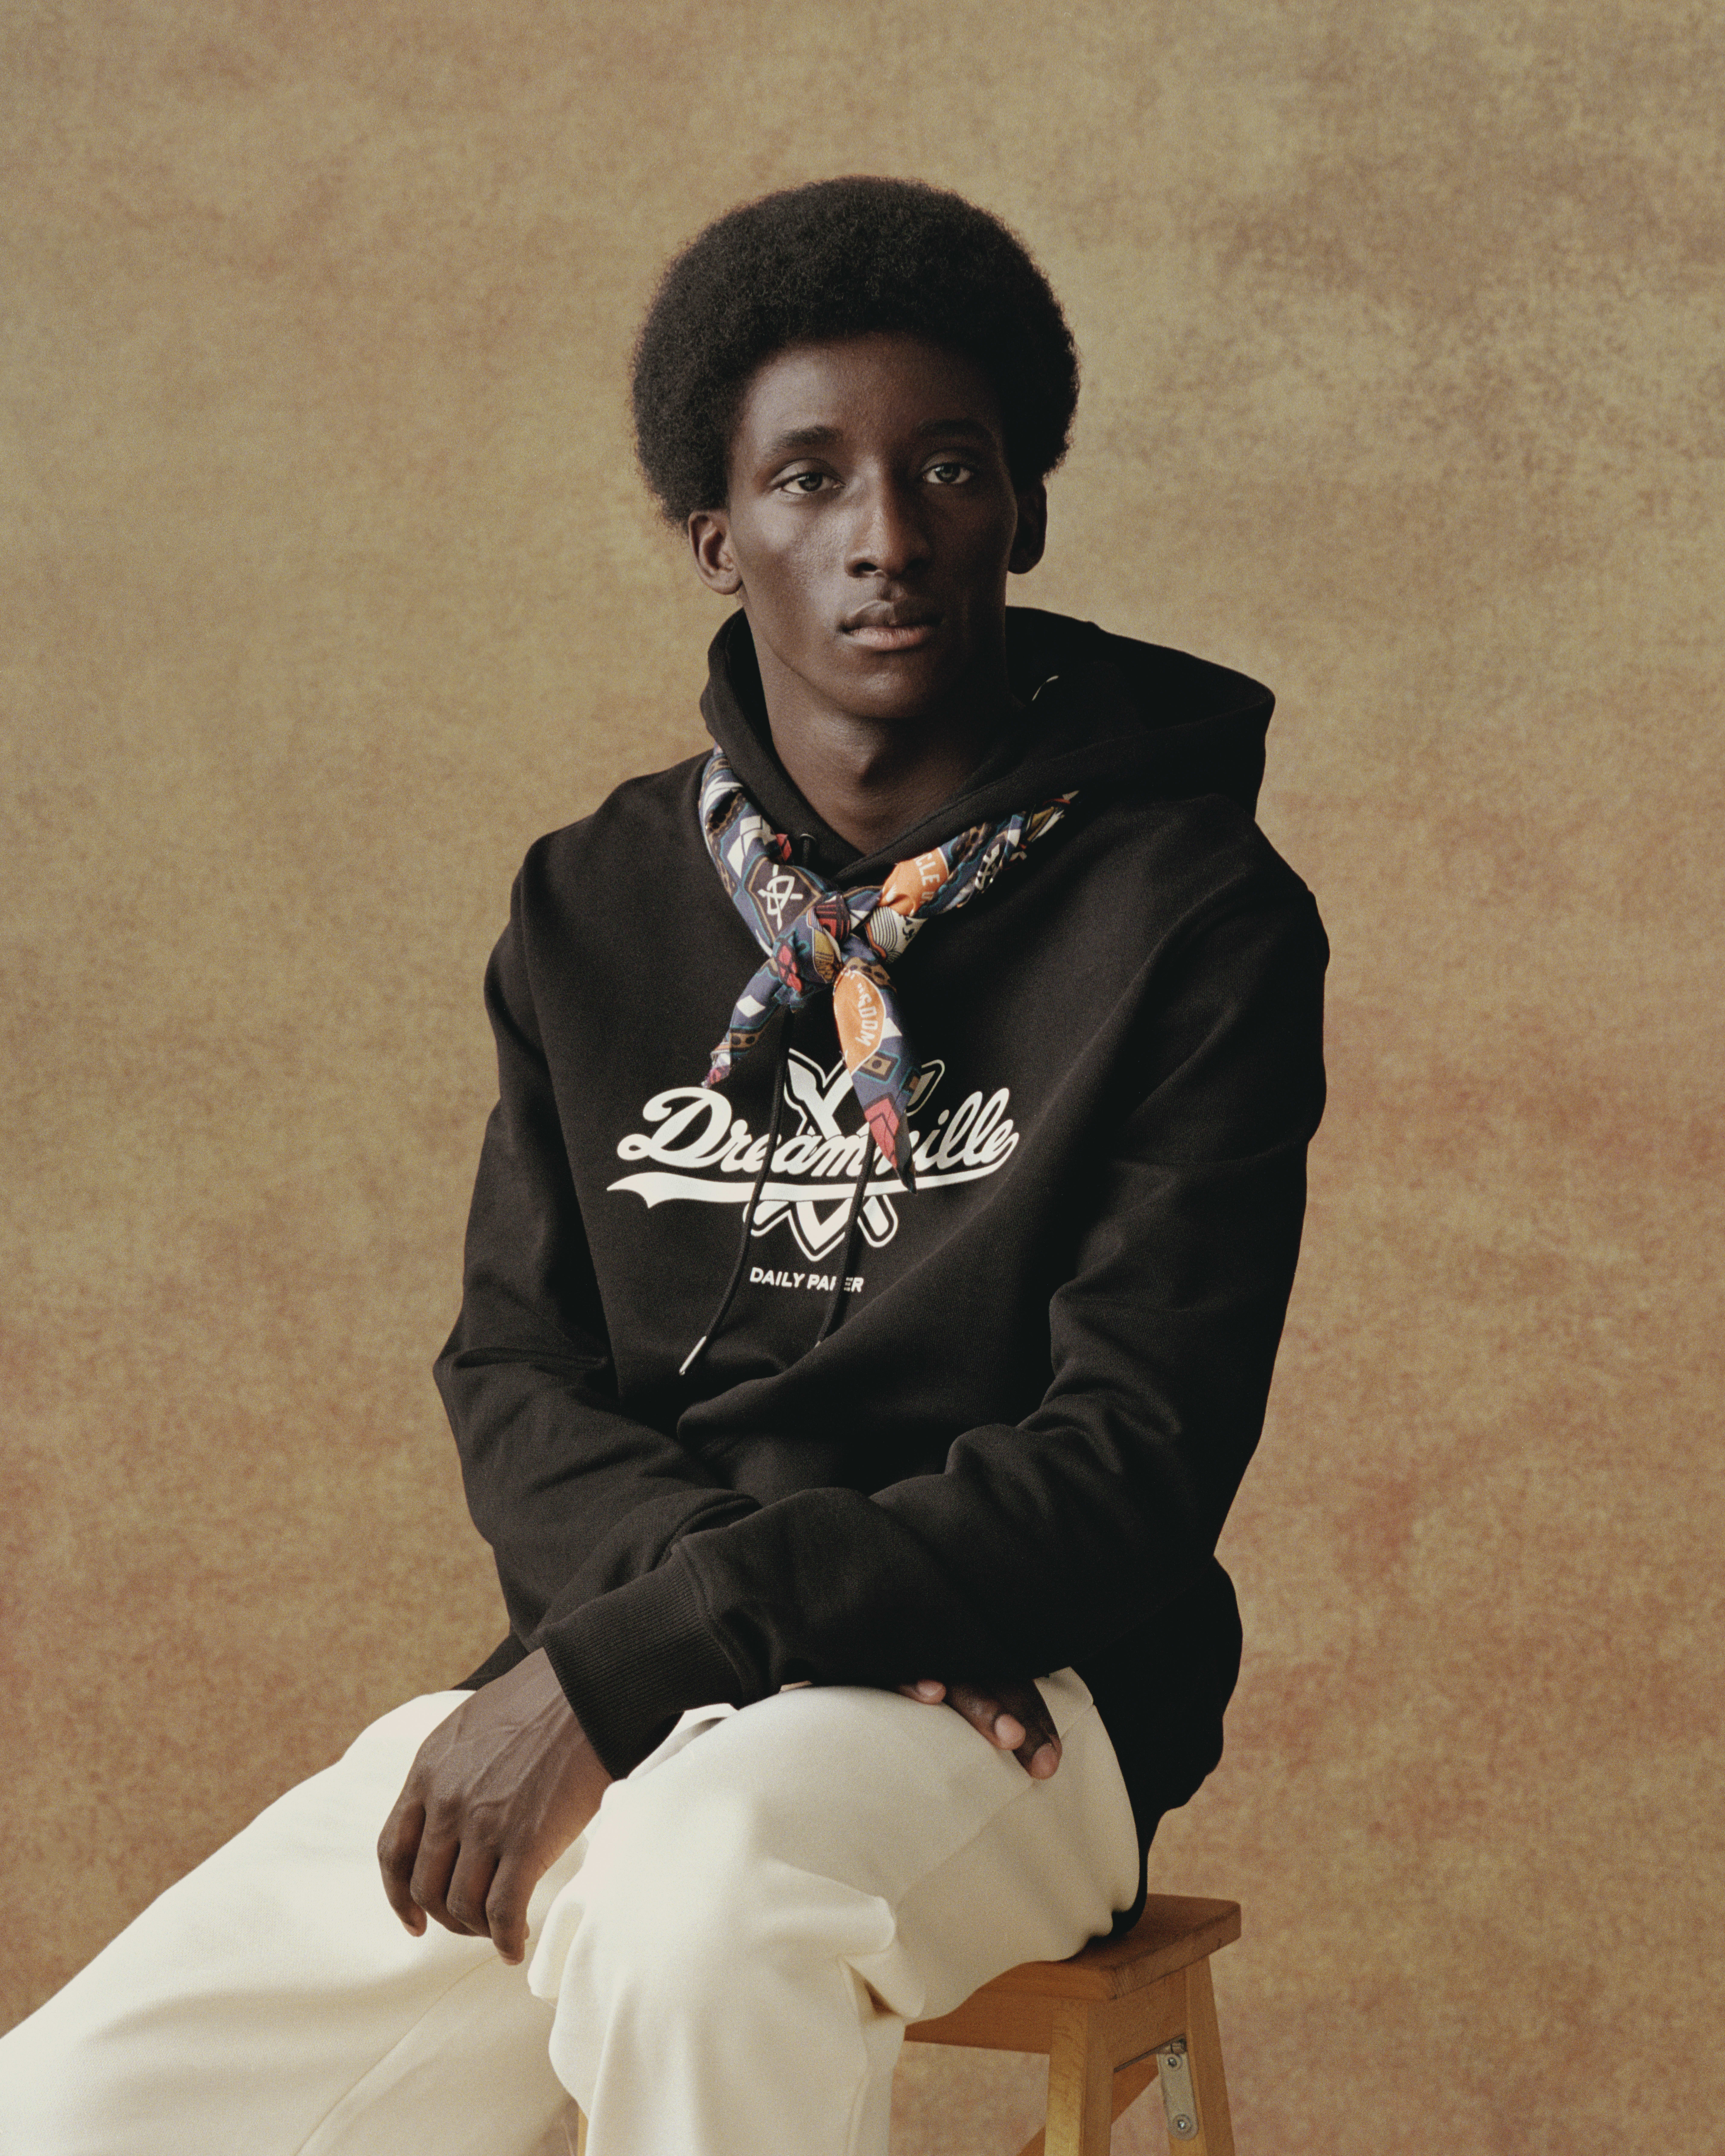 Dreamville model is pictured in campaign